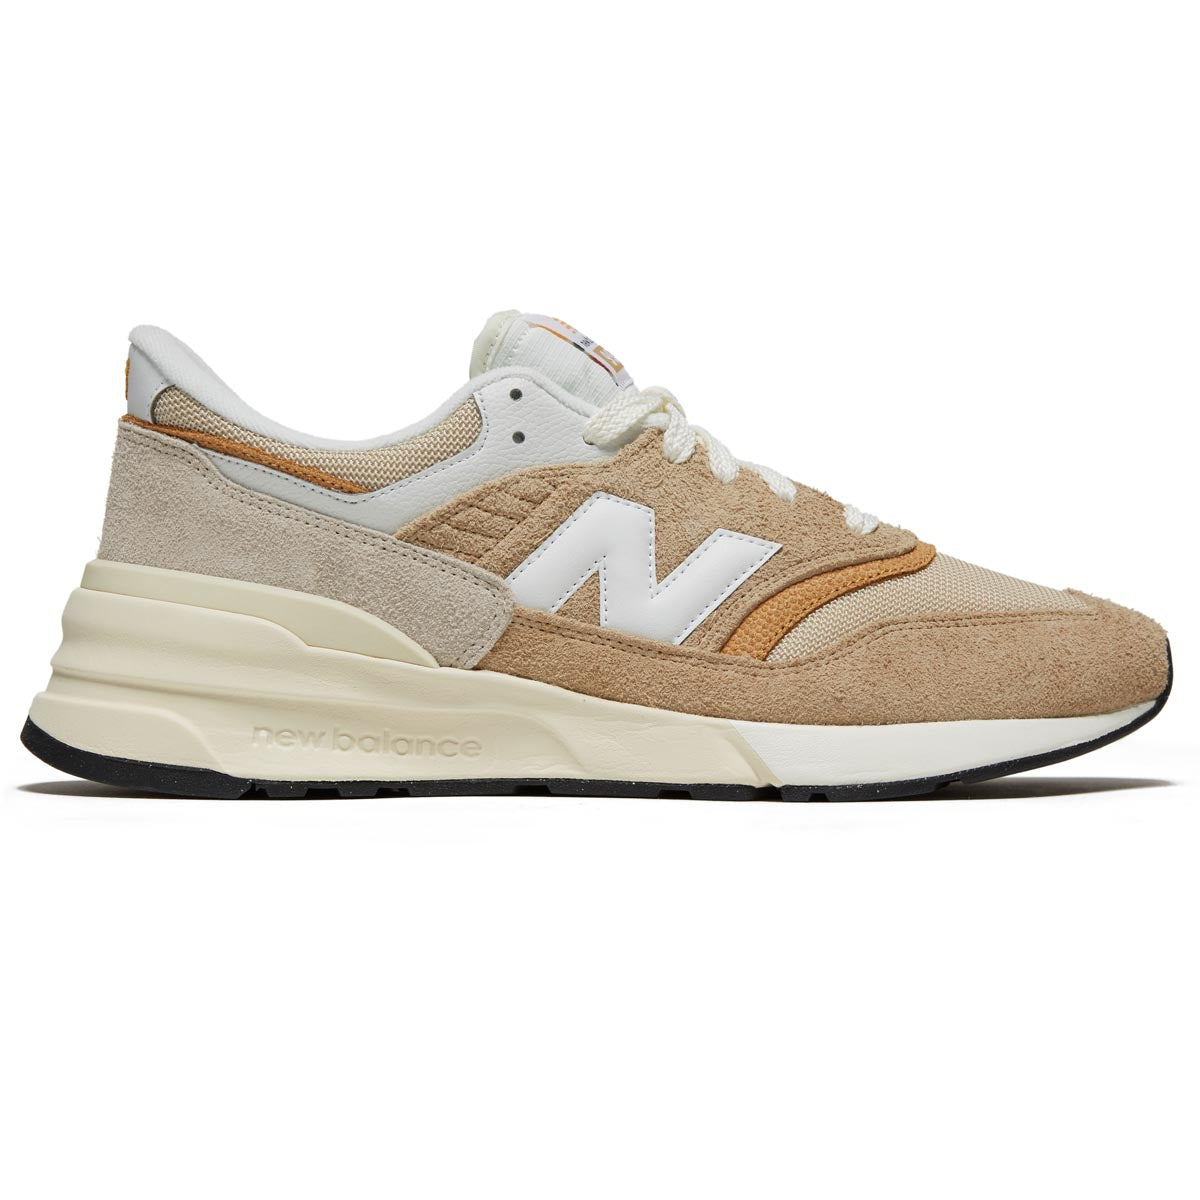 New Balance 997R Shoes - Dolce image 1